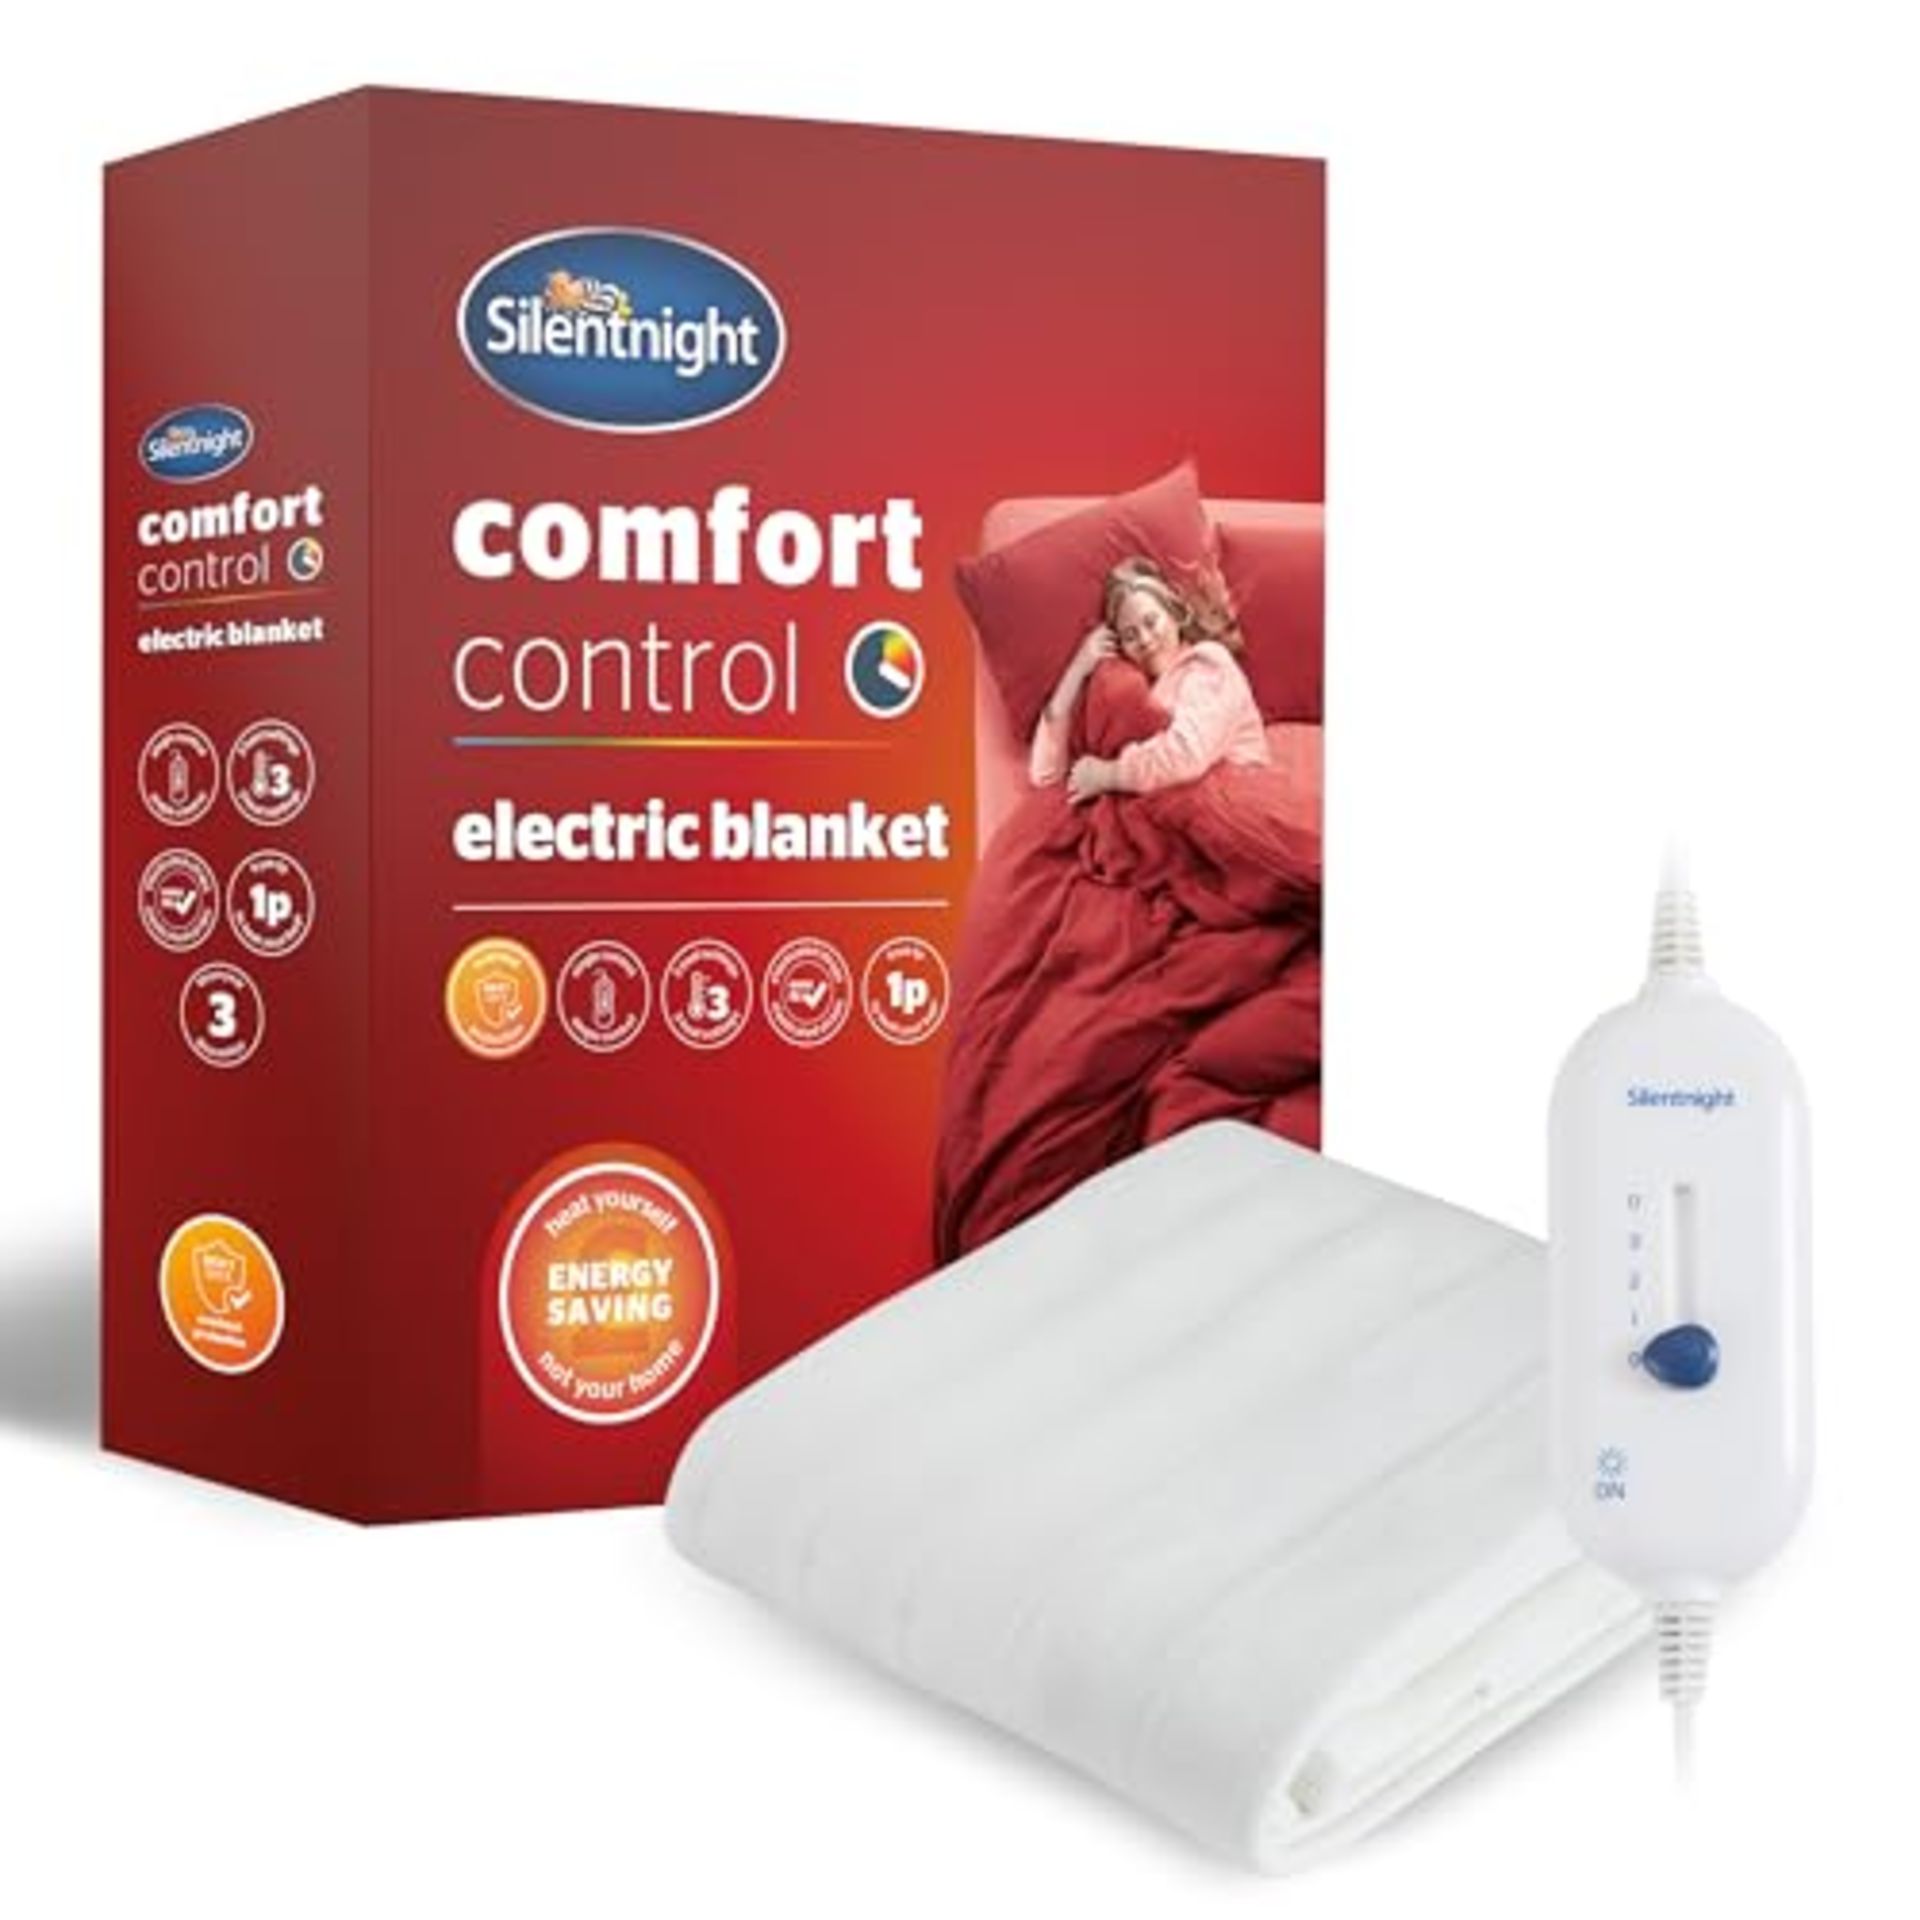 Silentnight Comfort Control Electric Blanket - Double - Image 3 of 3